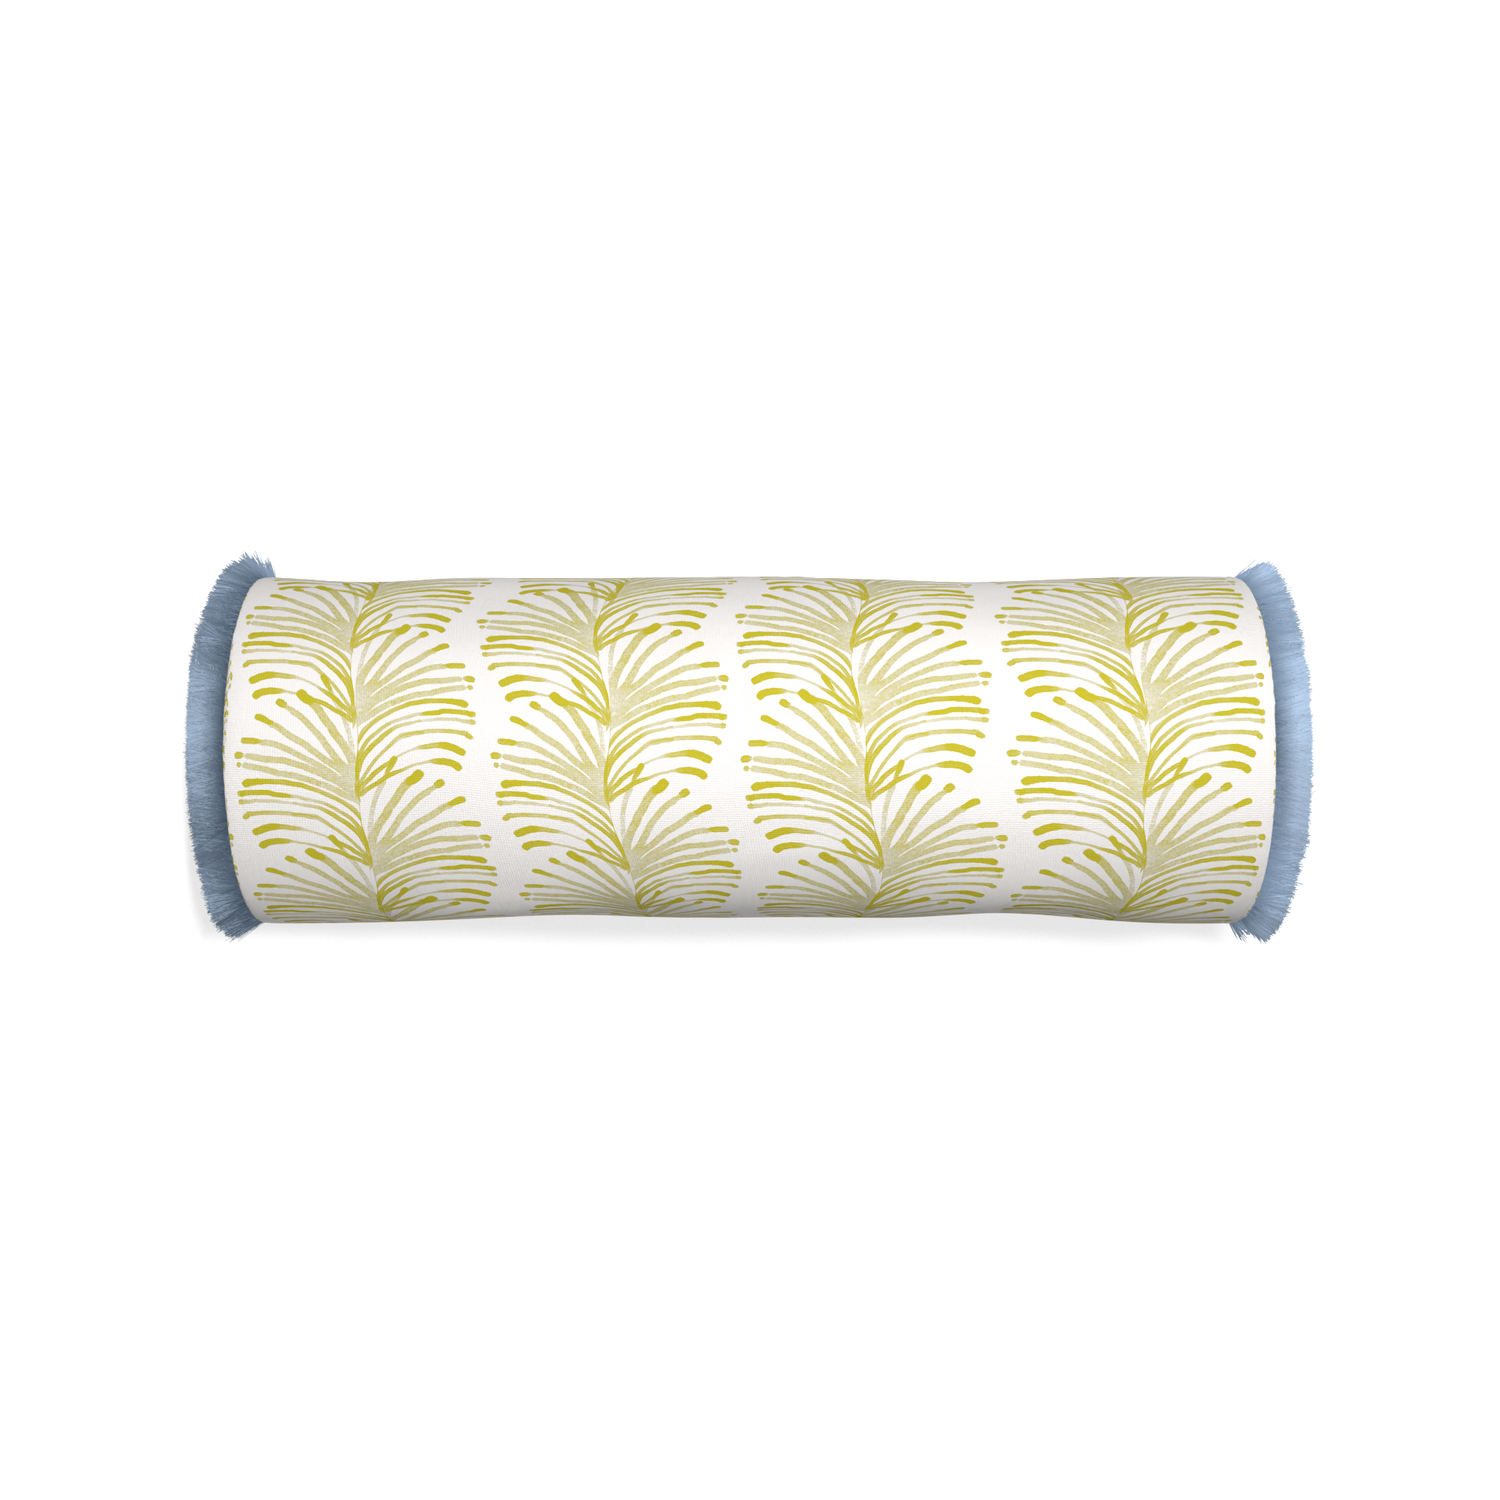 Bolster emma chartreuse custom yellow stripe chartreusepillow with sky fringe on white background